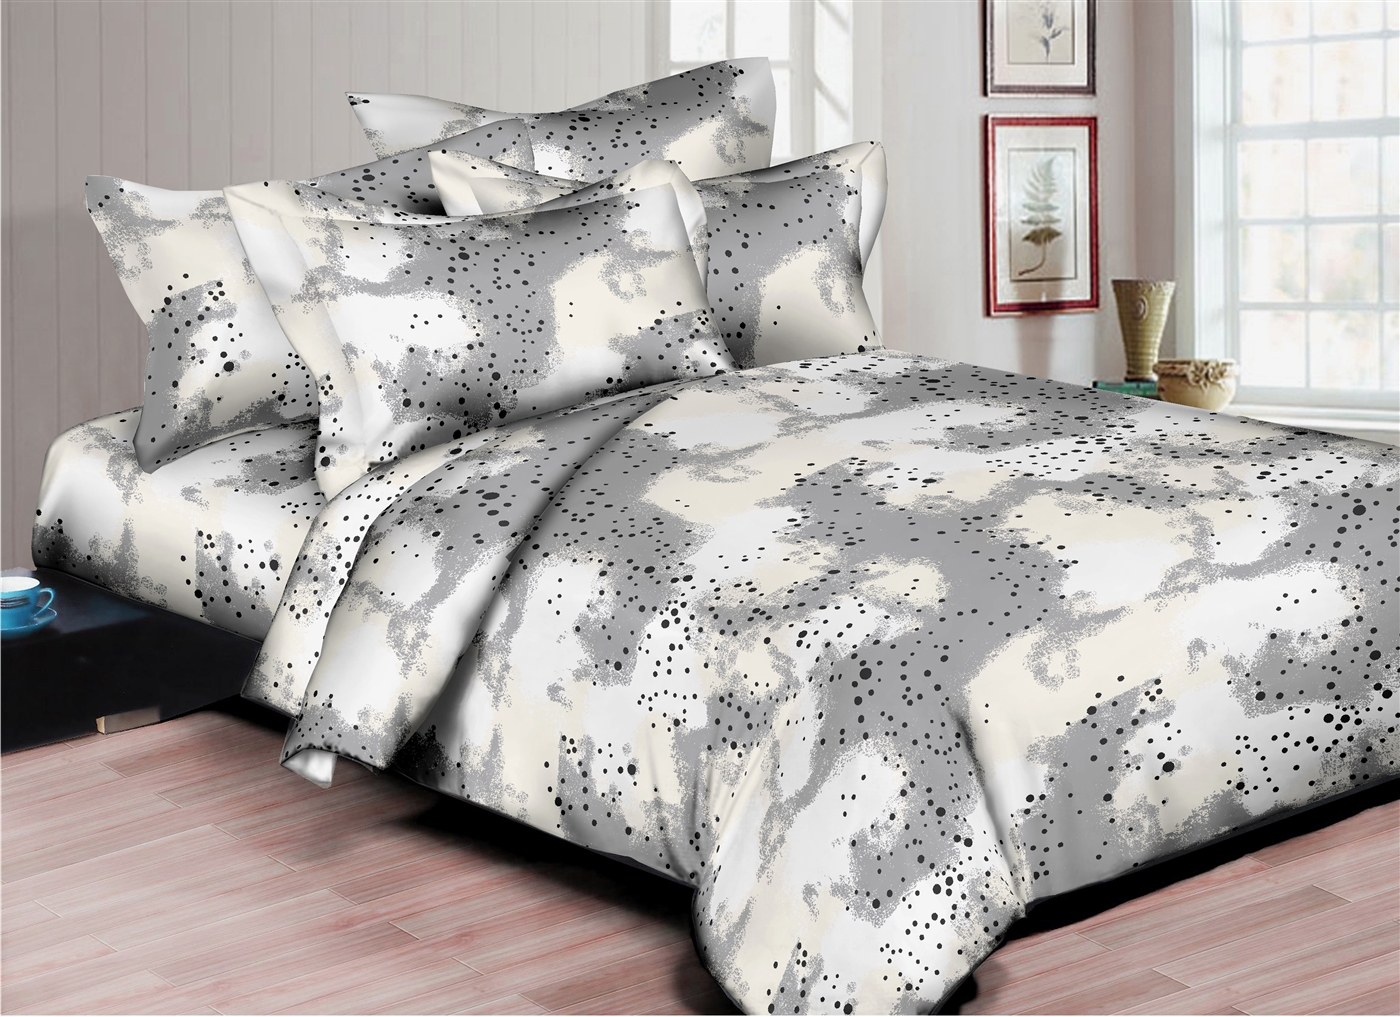 Superity Linen: Dotted Clouds Gray Twin Bedding Set